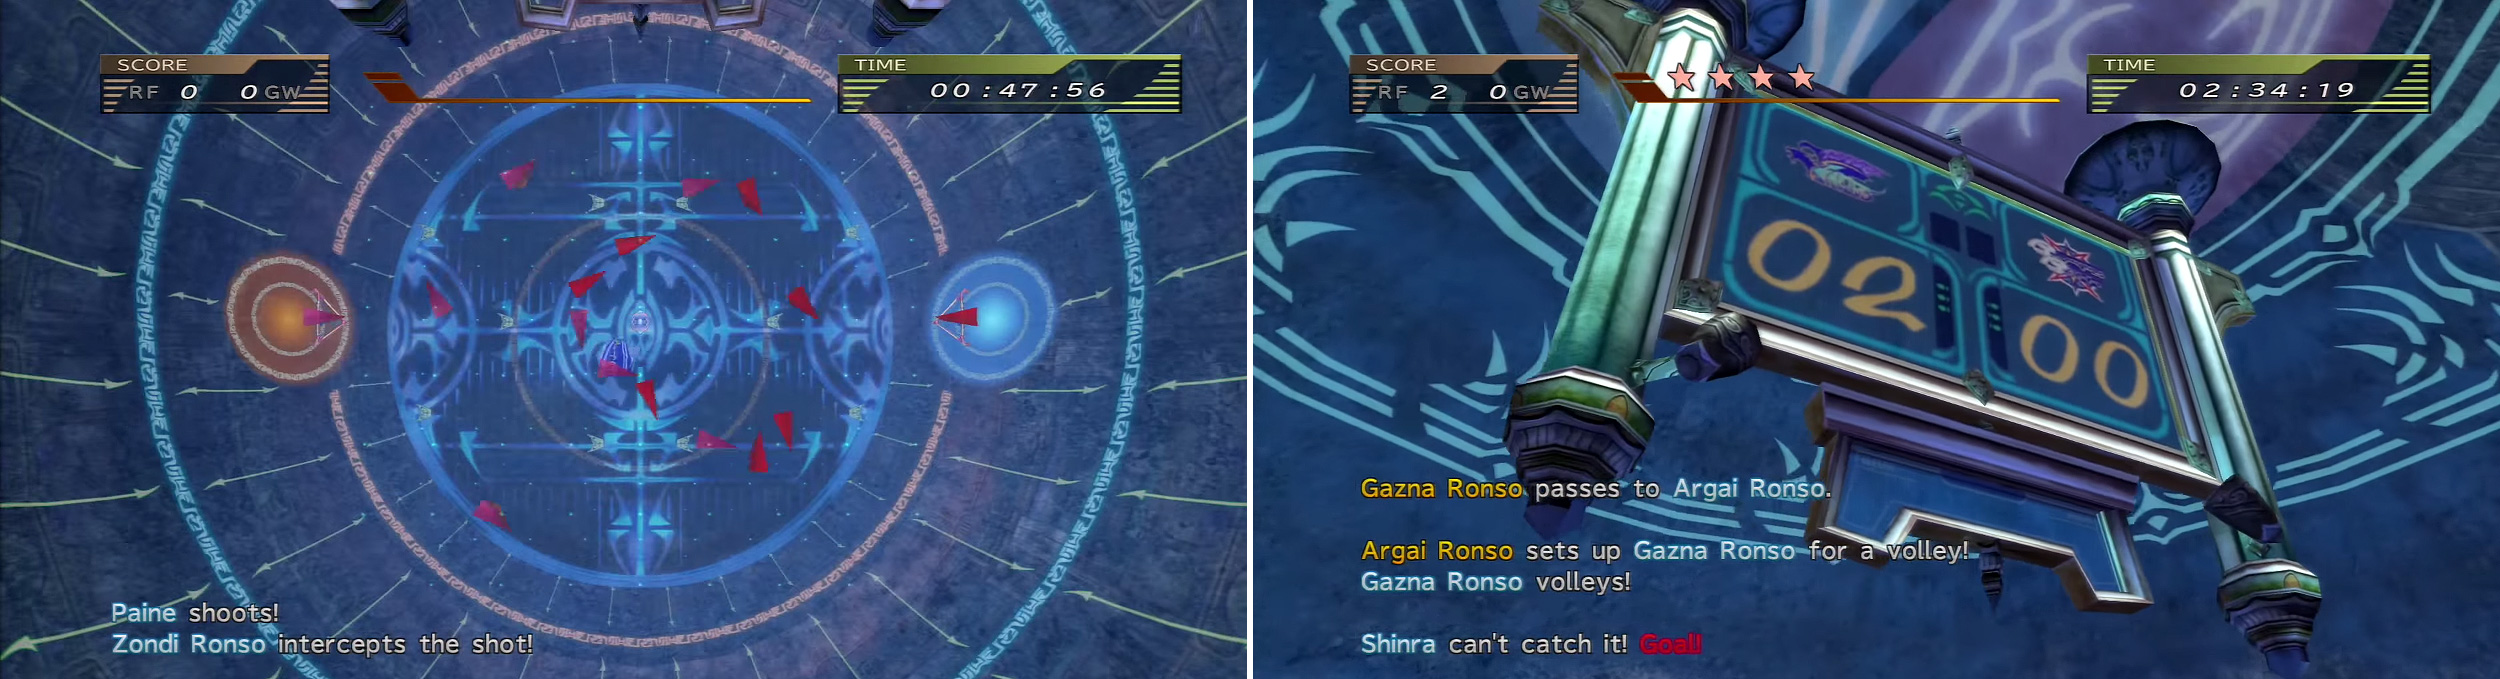 Sadly Blitzball in FFX-2 is not the same game. Needless to say, a game can run away from you quickly if you are expecting it to be anything like FFX.